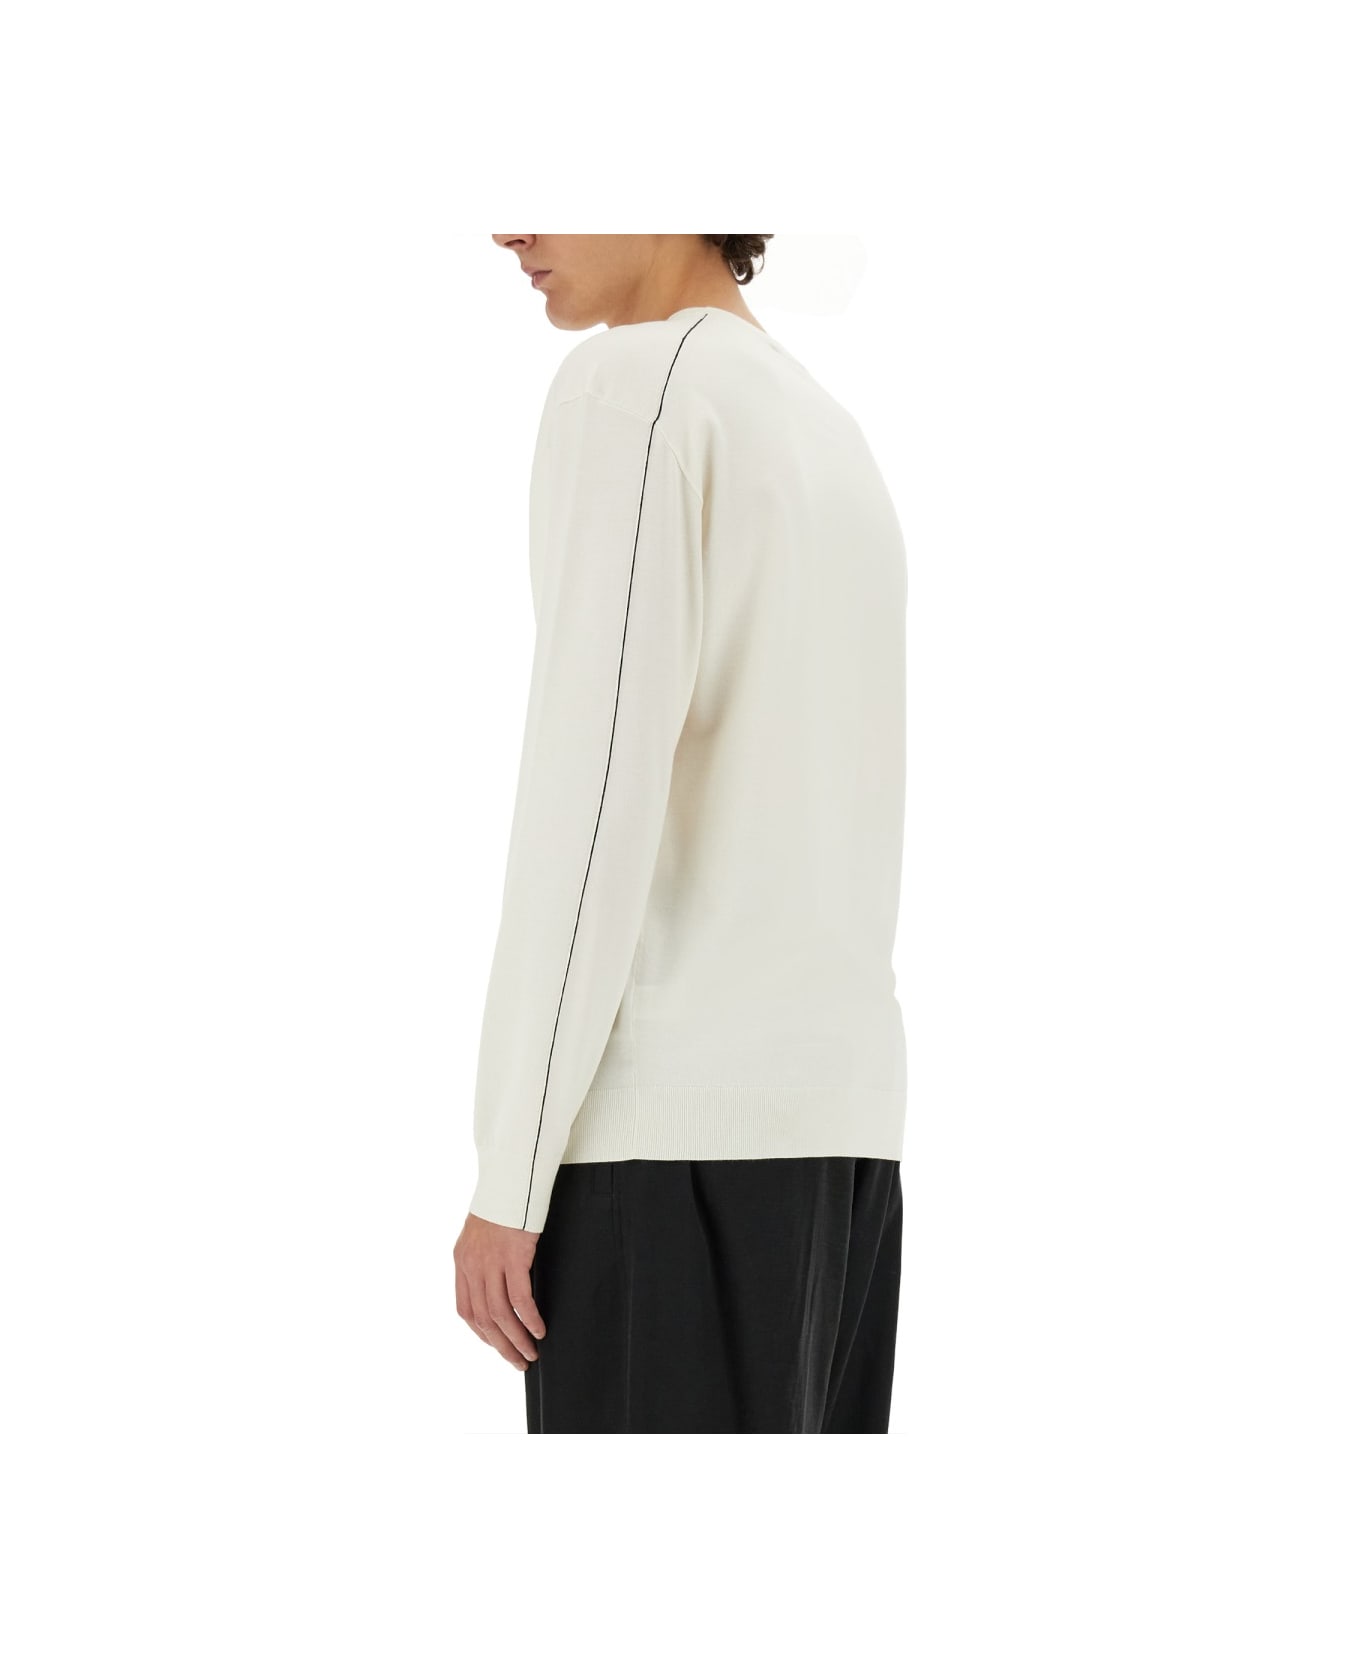 Helmut Lang Jersey With Logo - WHITE